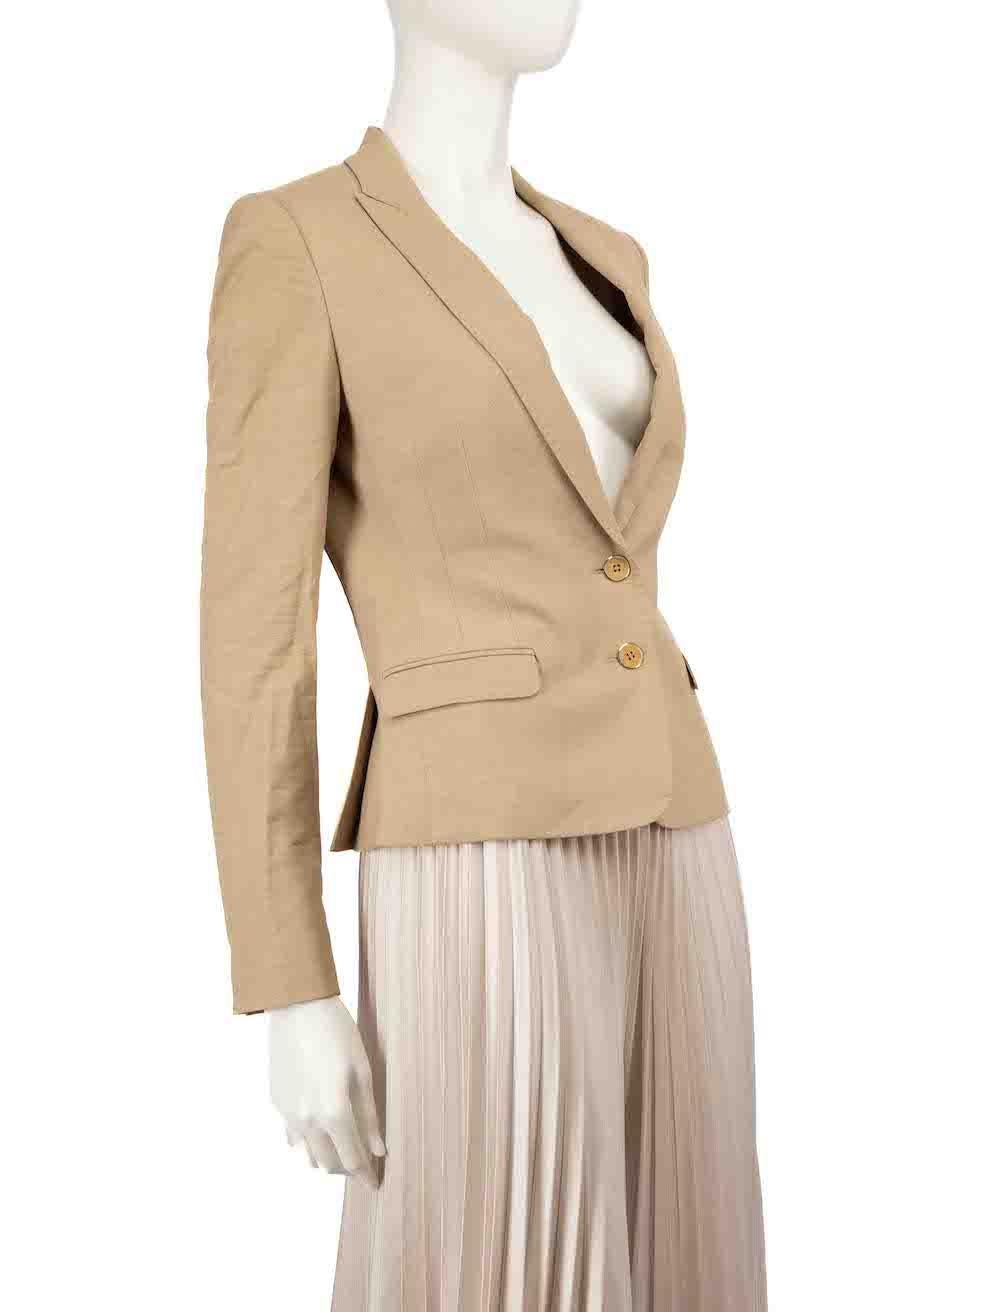 CONDITION is Very good. Minimal wear to the blazer is evident. Minimal tarnishing to the buttons on this used Dolce & Gabbana designer resale item.
 
 
 
 Details
 
 
 Beige
 
 Viscose
 
 Blazer
 
 Single breasted
 
 Button up fastening
 
 Shoulder